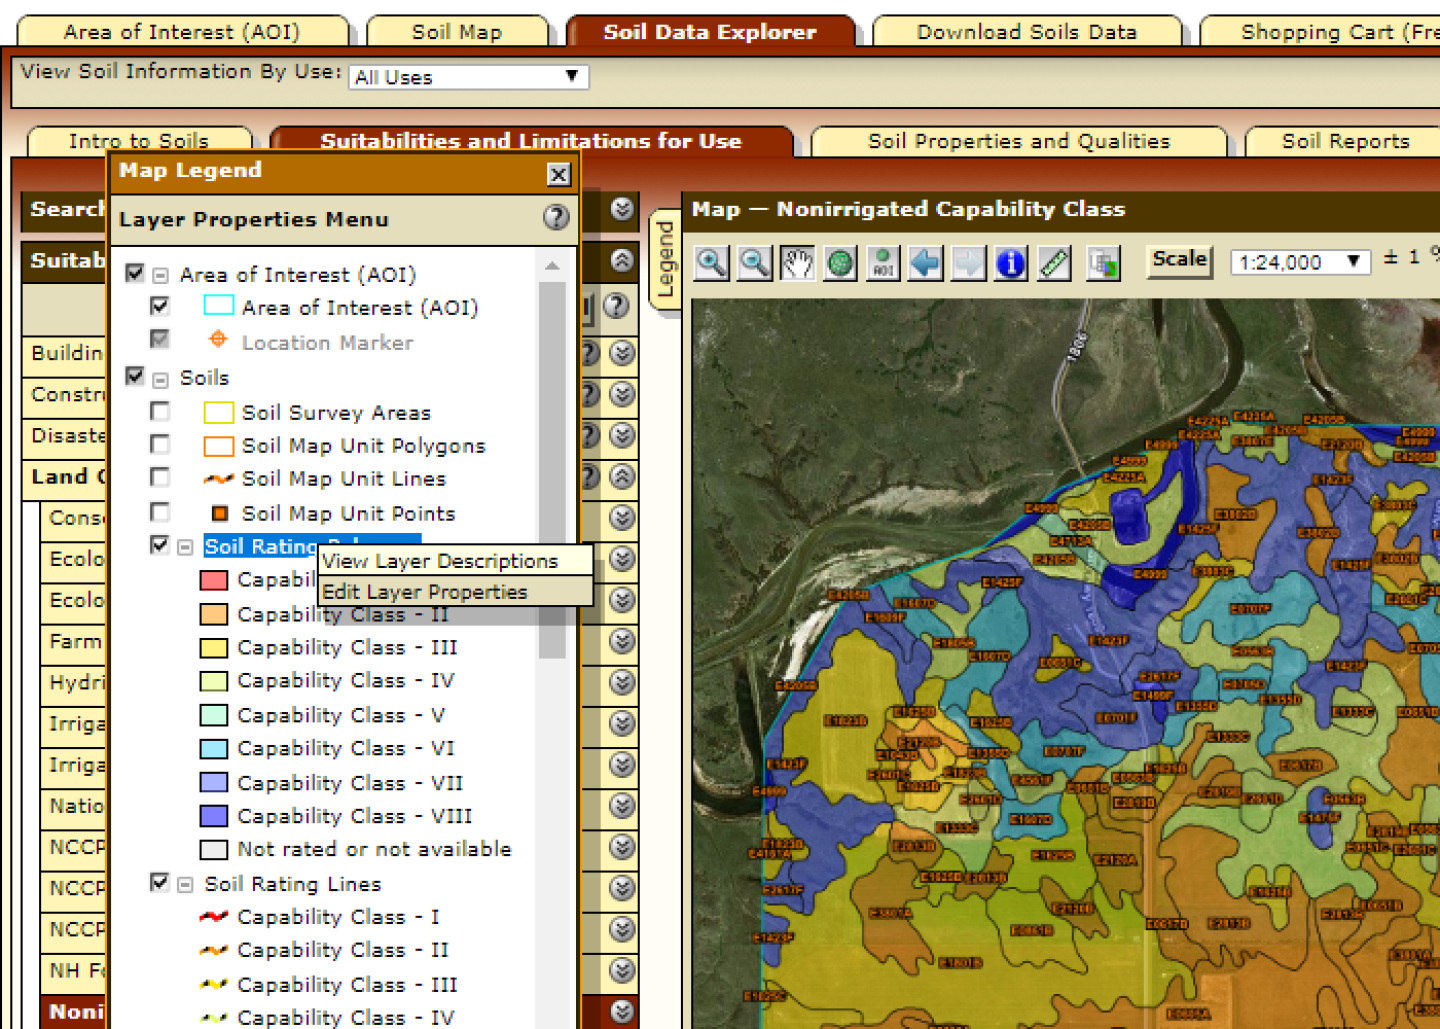 Select Edit Layer Properties within the Soil Ratings layer. 